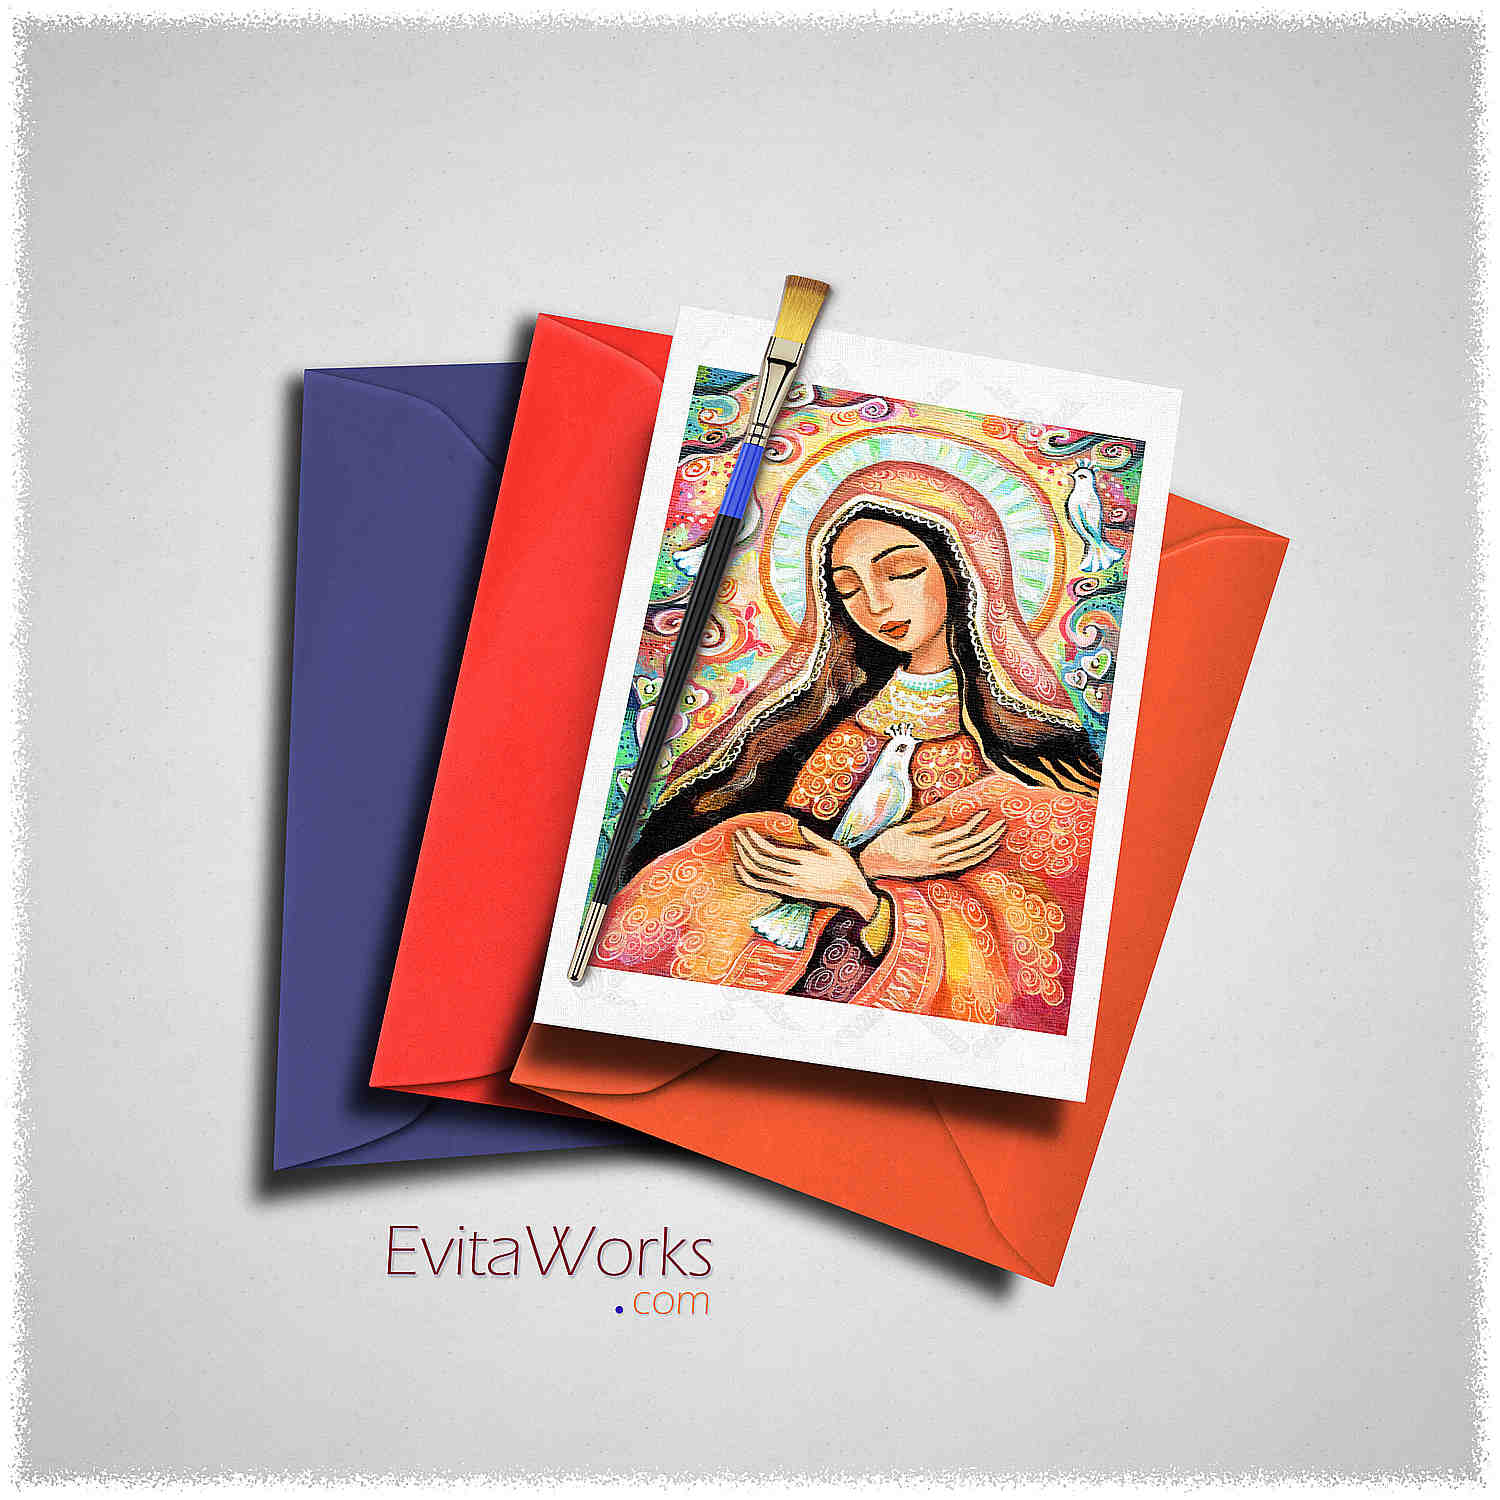 Hit to learn about "The Prayer of Mary, holy woman" on cards